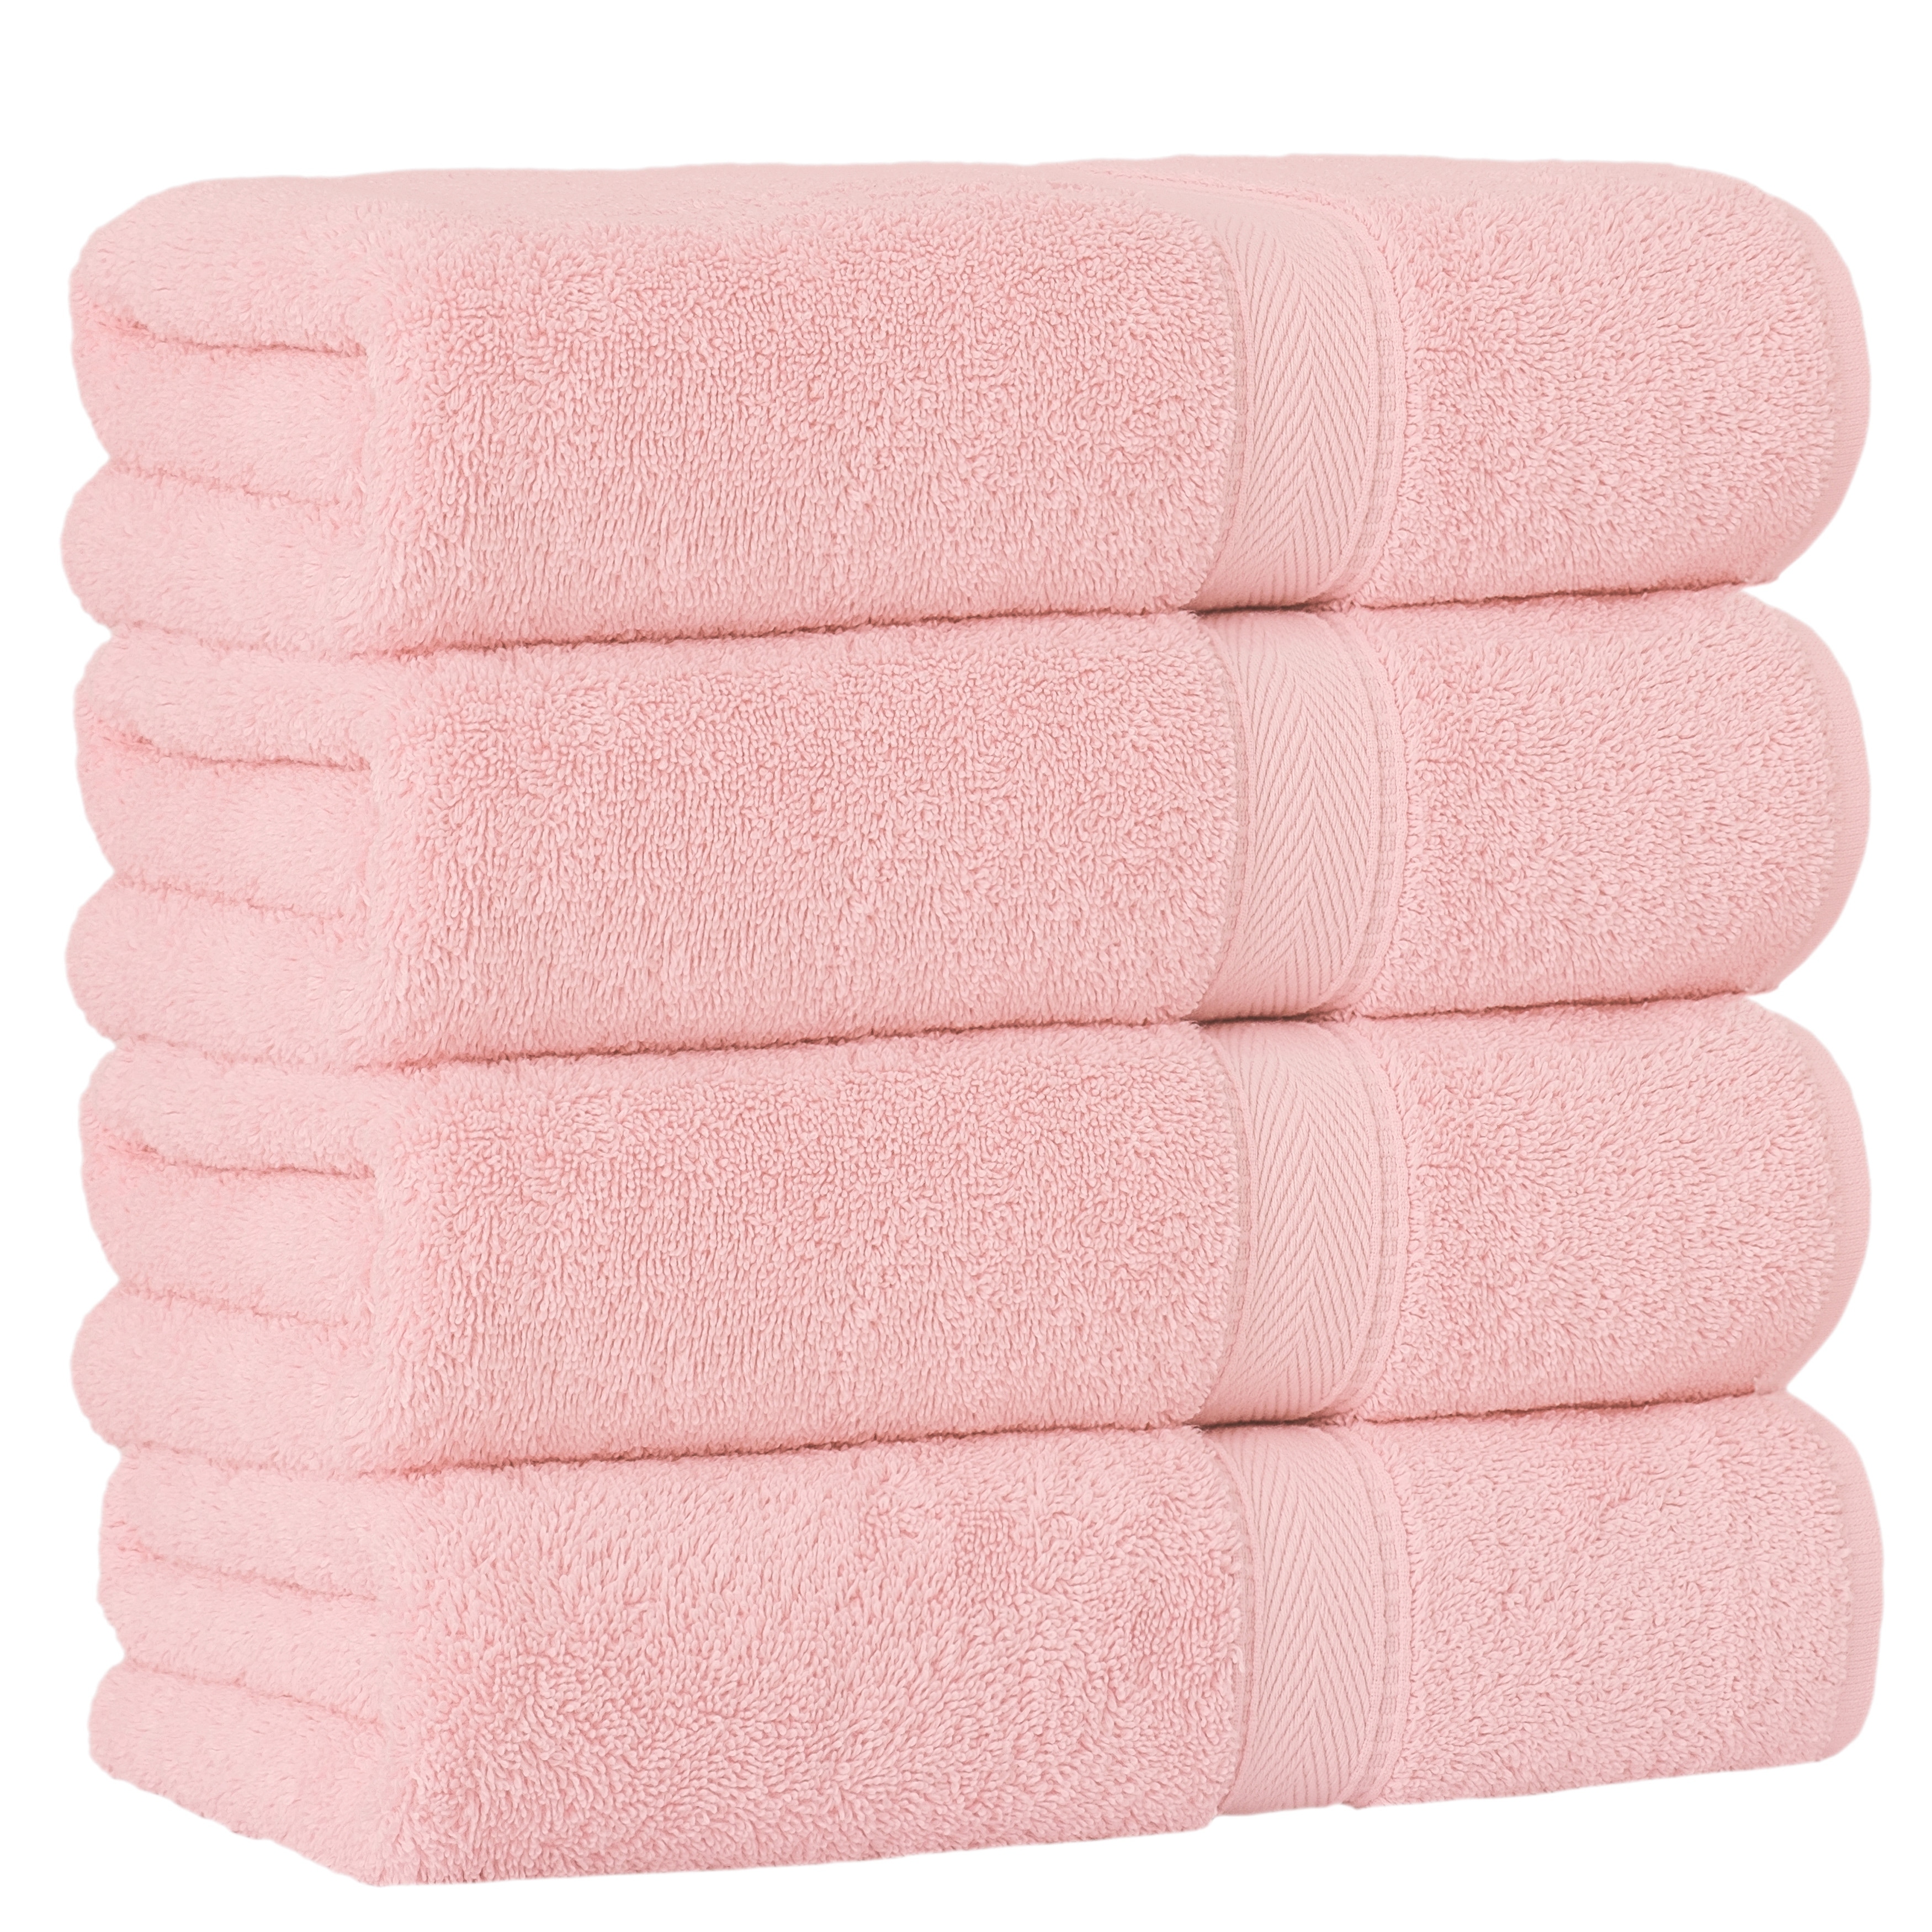 Pink Cotton Towel Face Towels, Hand Towels Cotton Home Hotel